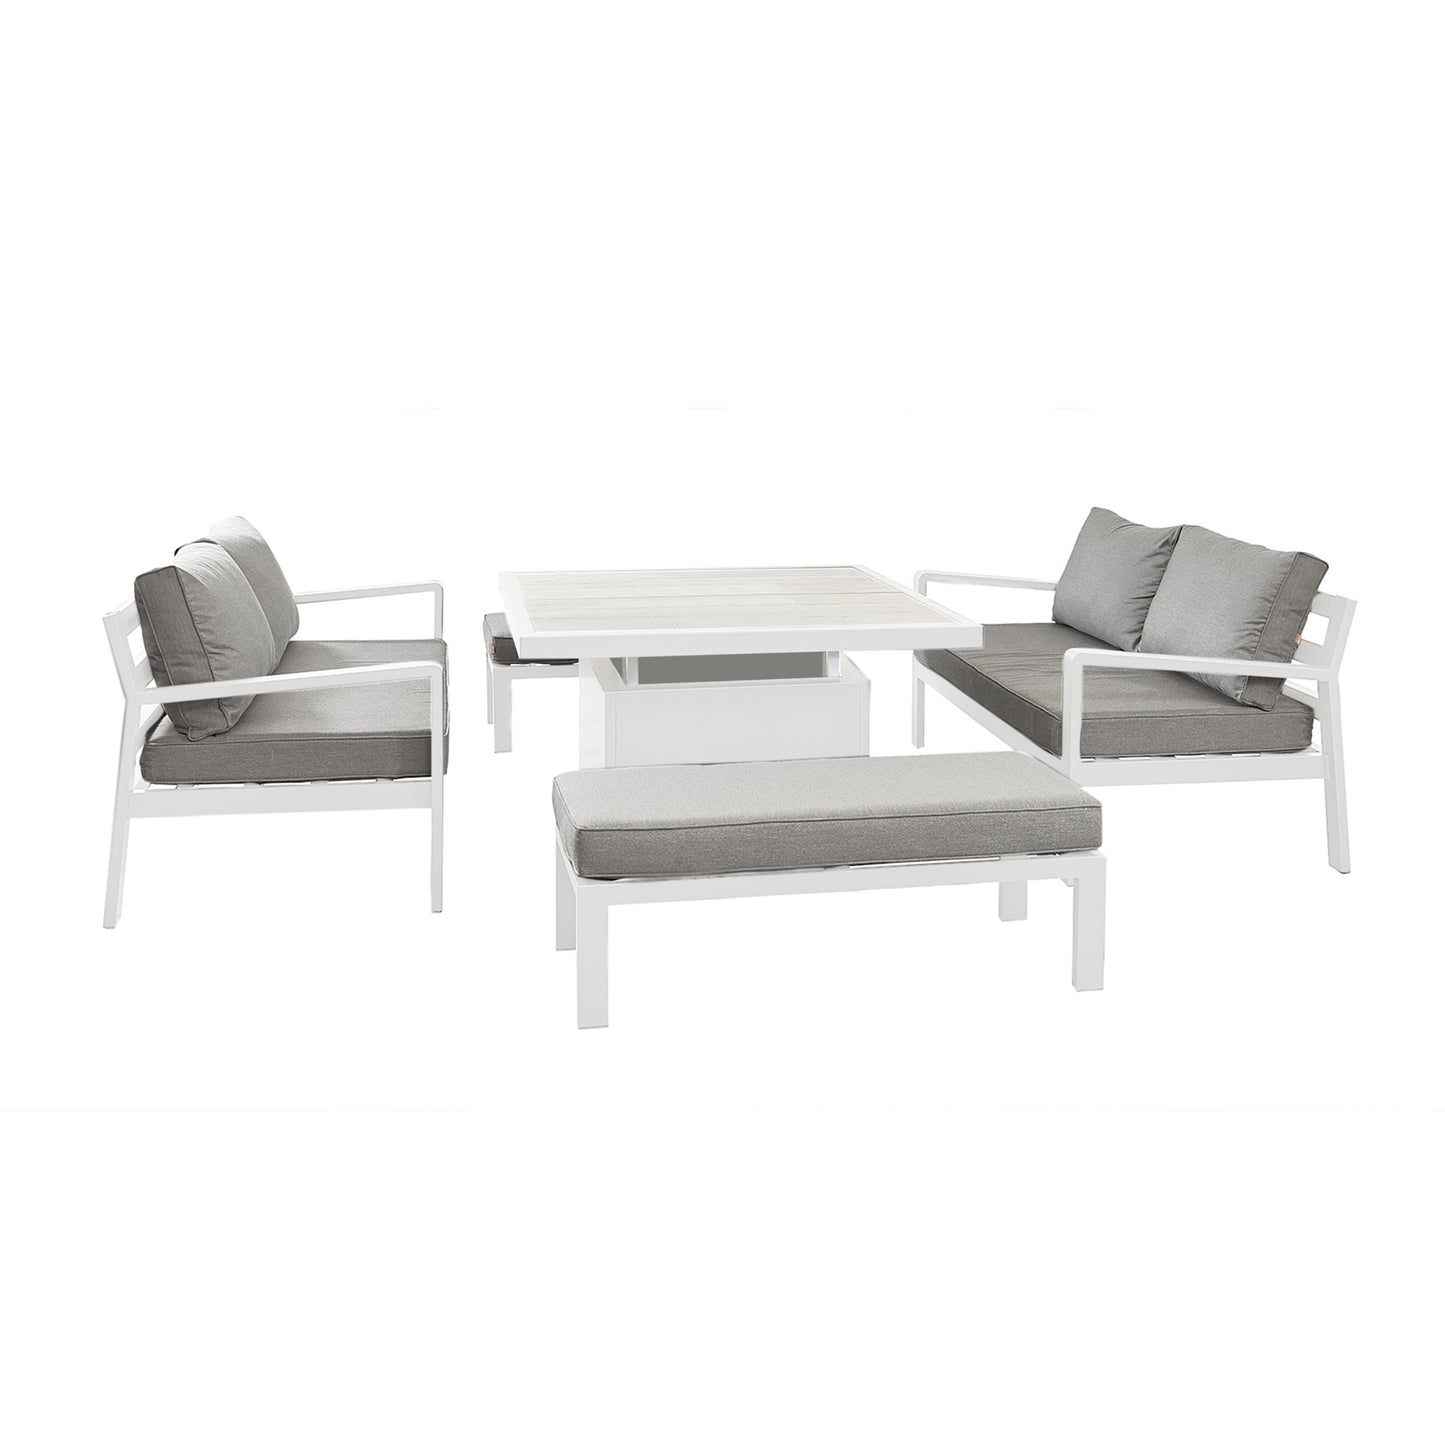 HEX Living - Tutbury Dual Height Square Table with Two Sofas and Two Large Benches